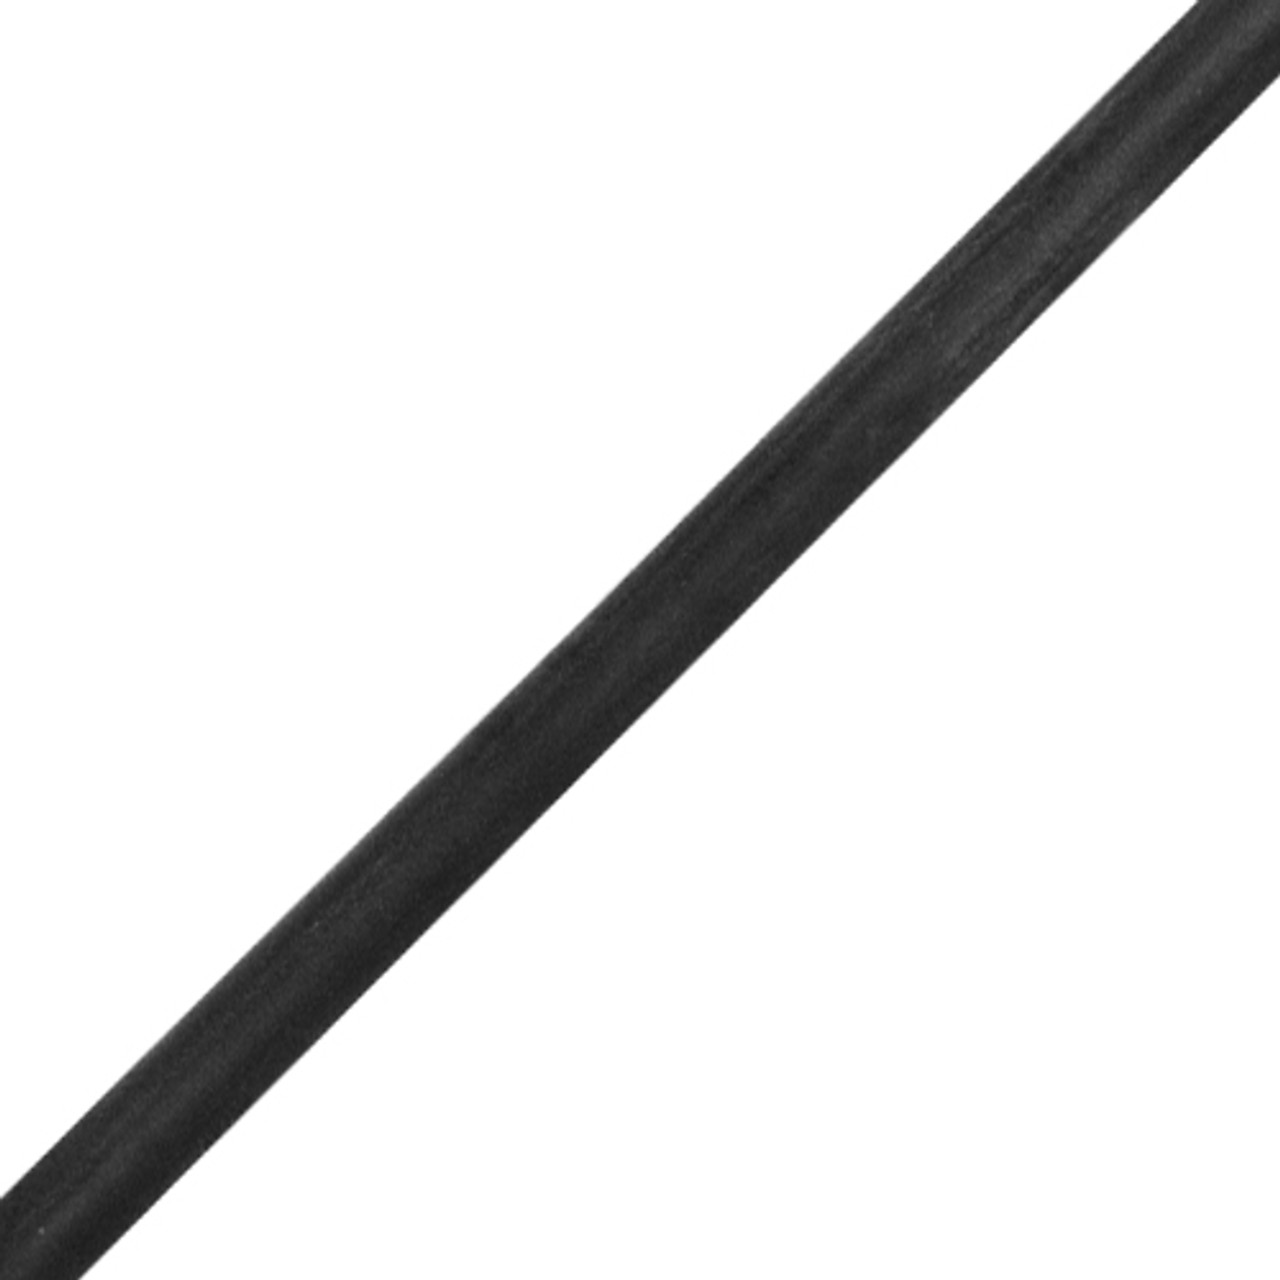 EPDM Rubber Bungee Rope Solid Core 3/8 x 200' - Mytee Products